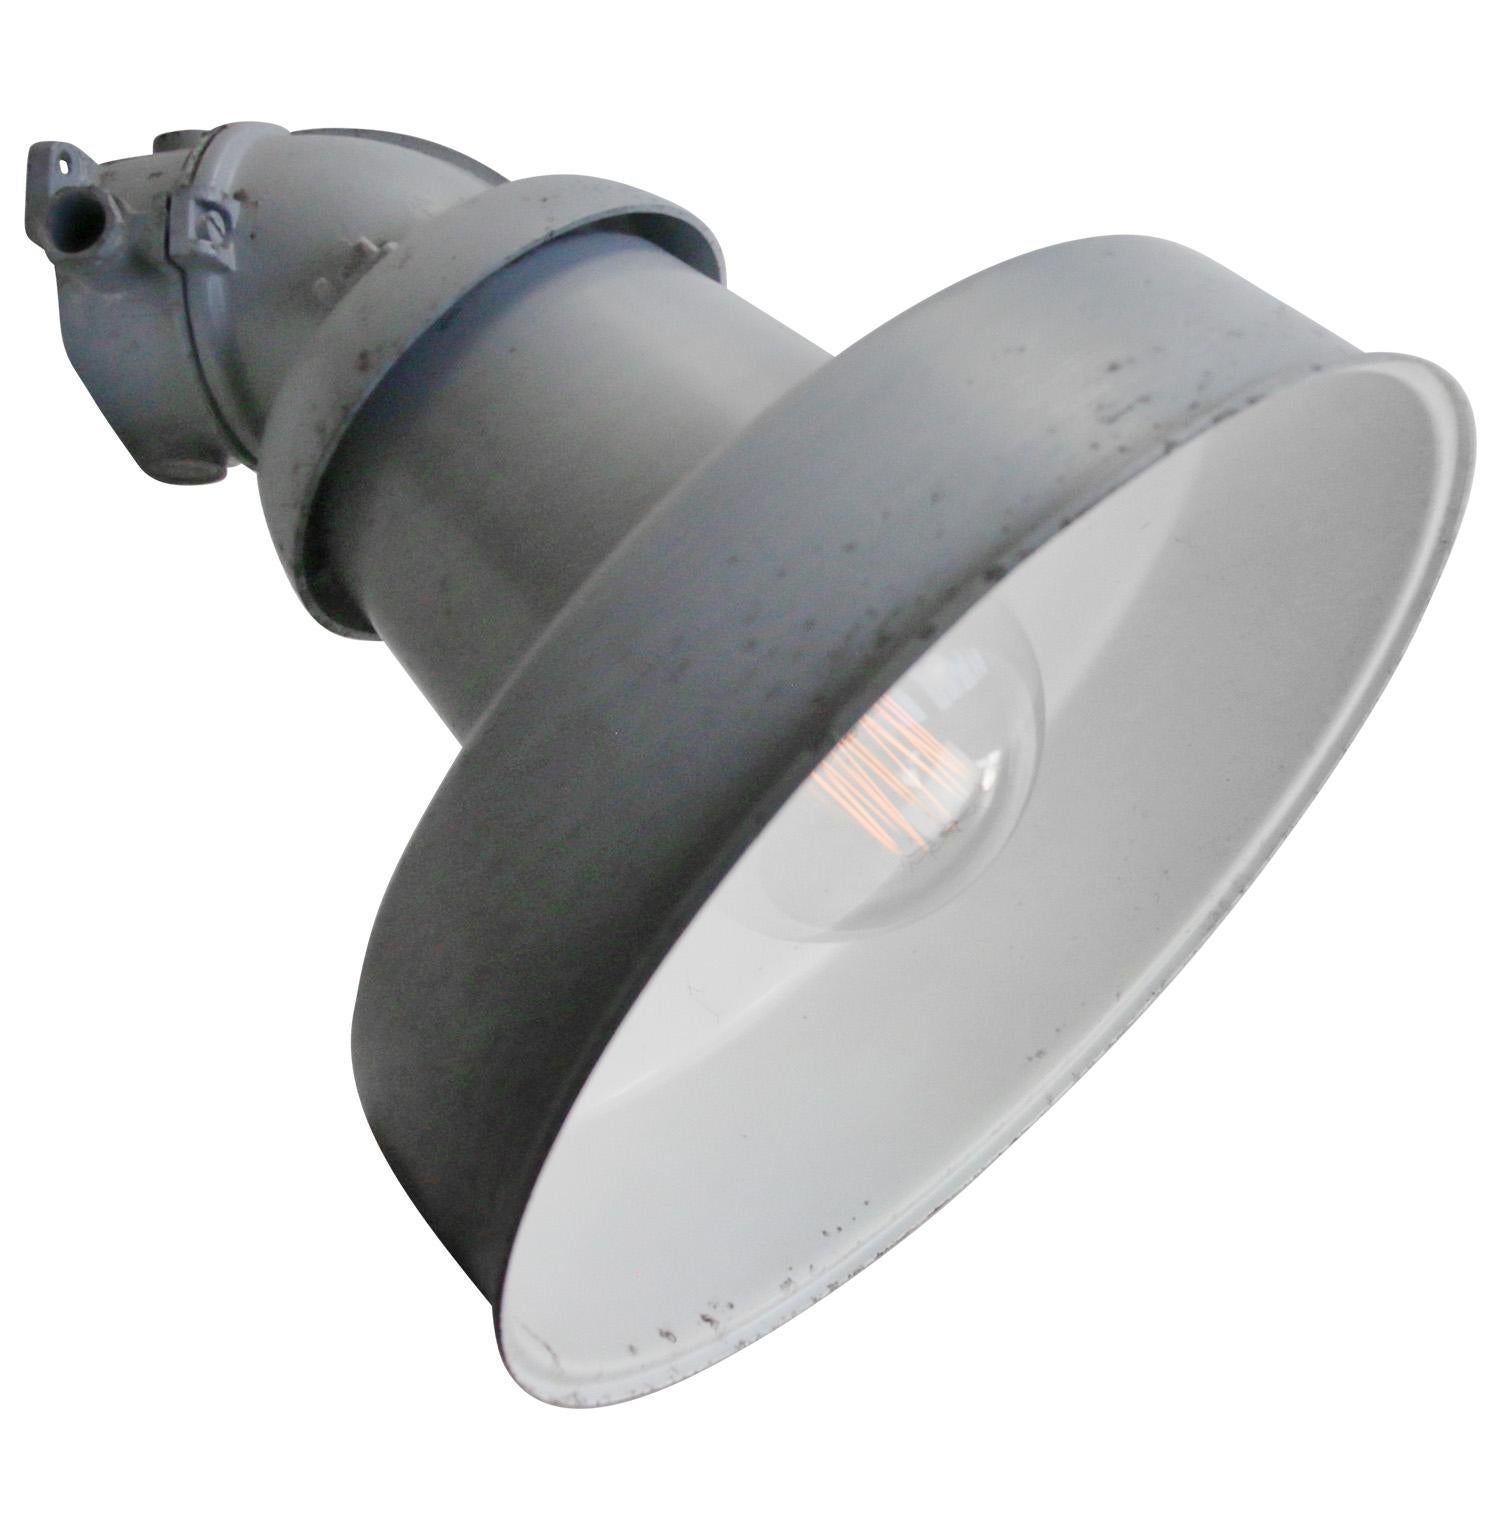 Industria Rotterdam industrial 45 degrees wall light.
Grey aluminium.

Weight: 1.60 kg / 3.5 lb.

Priced per individual item. All lamps have been made suitable by international standards for incandescent light bulbs, energy-efficient and LED